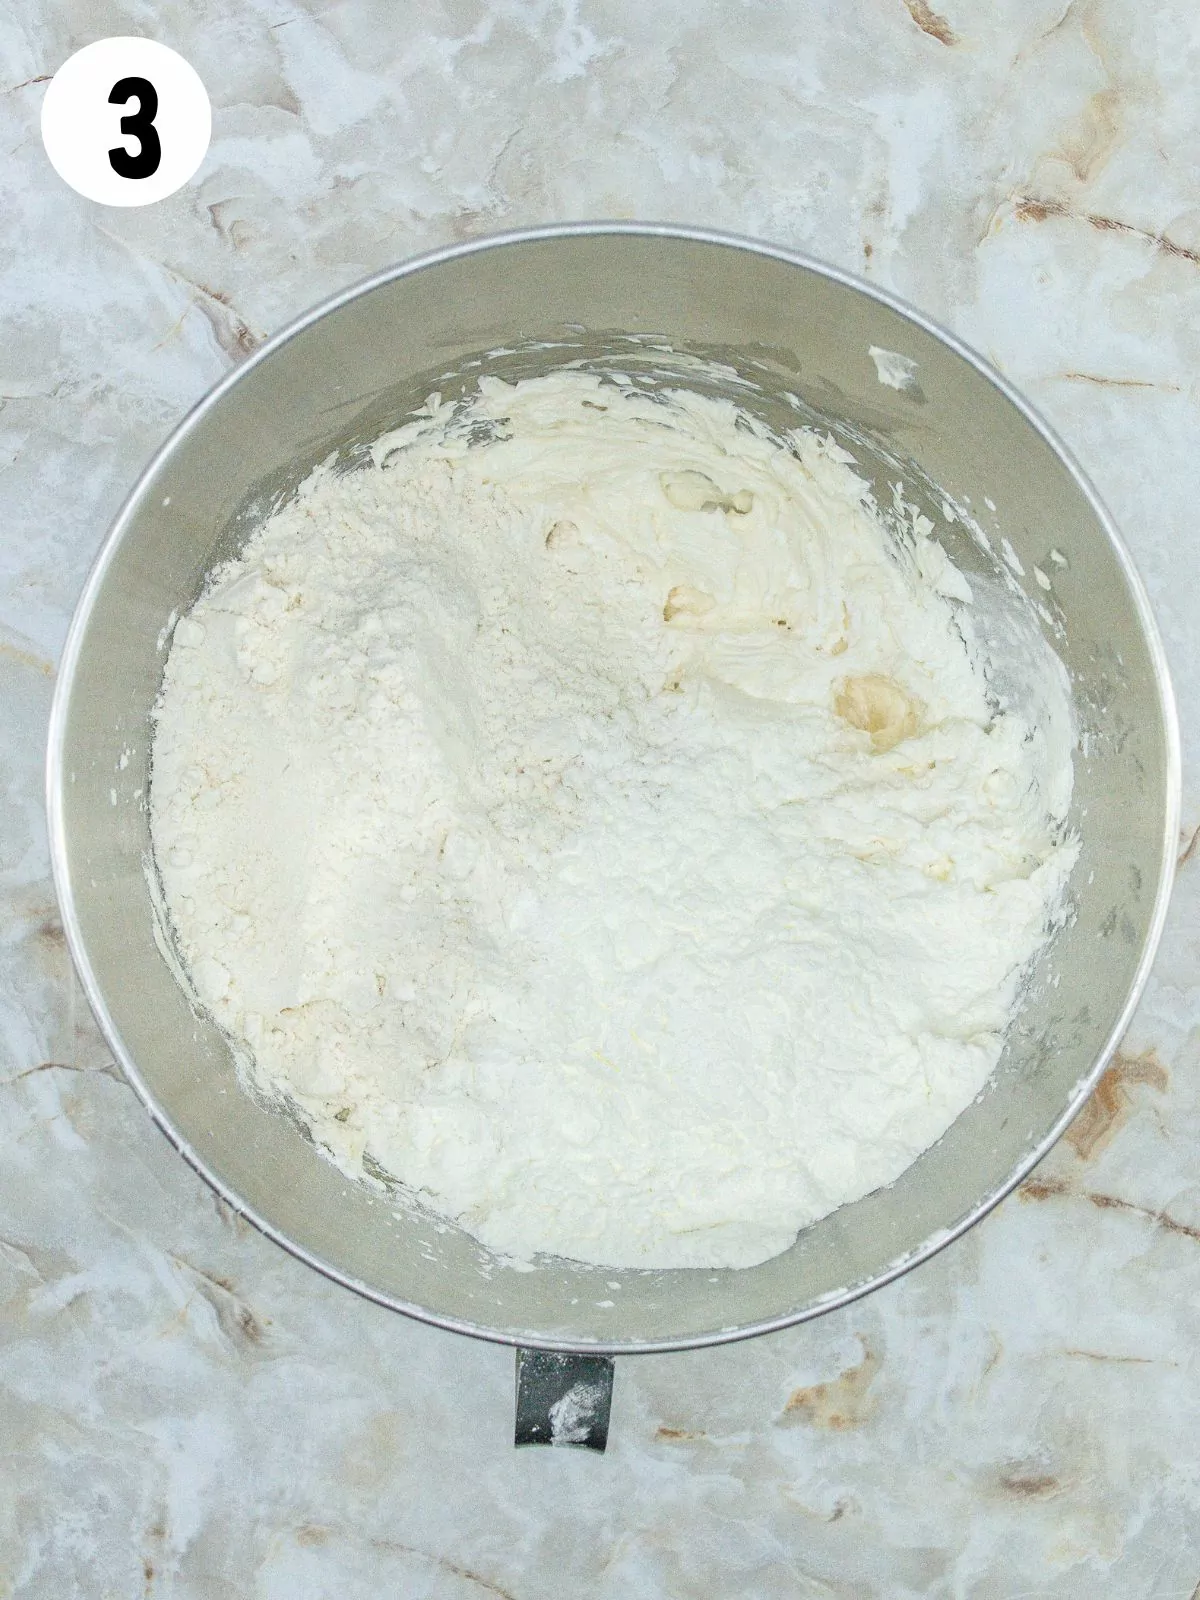 flour added to butter mixture in bowl.